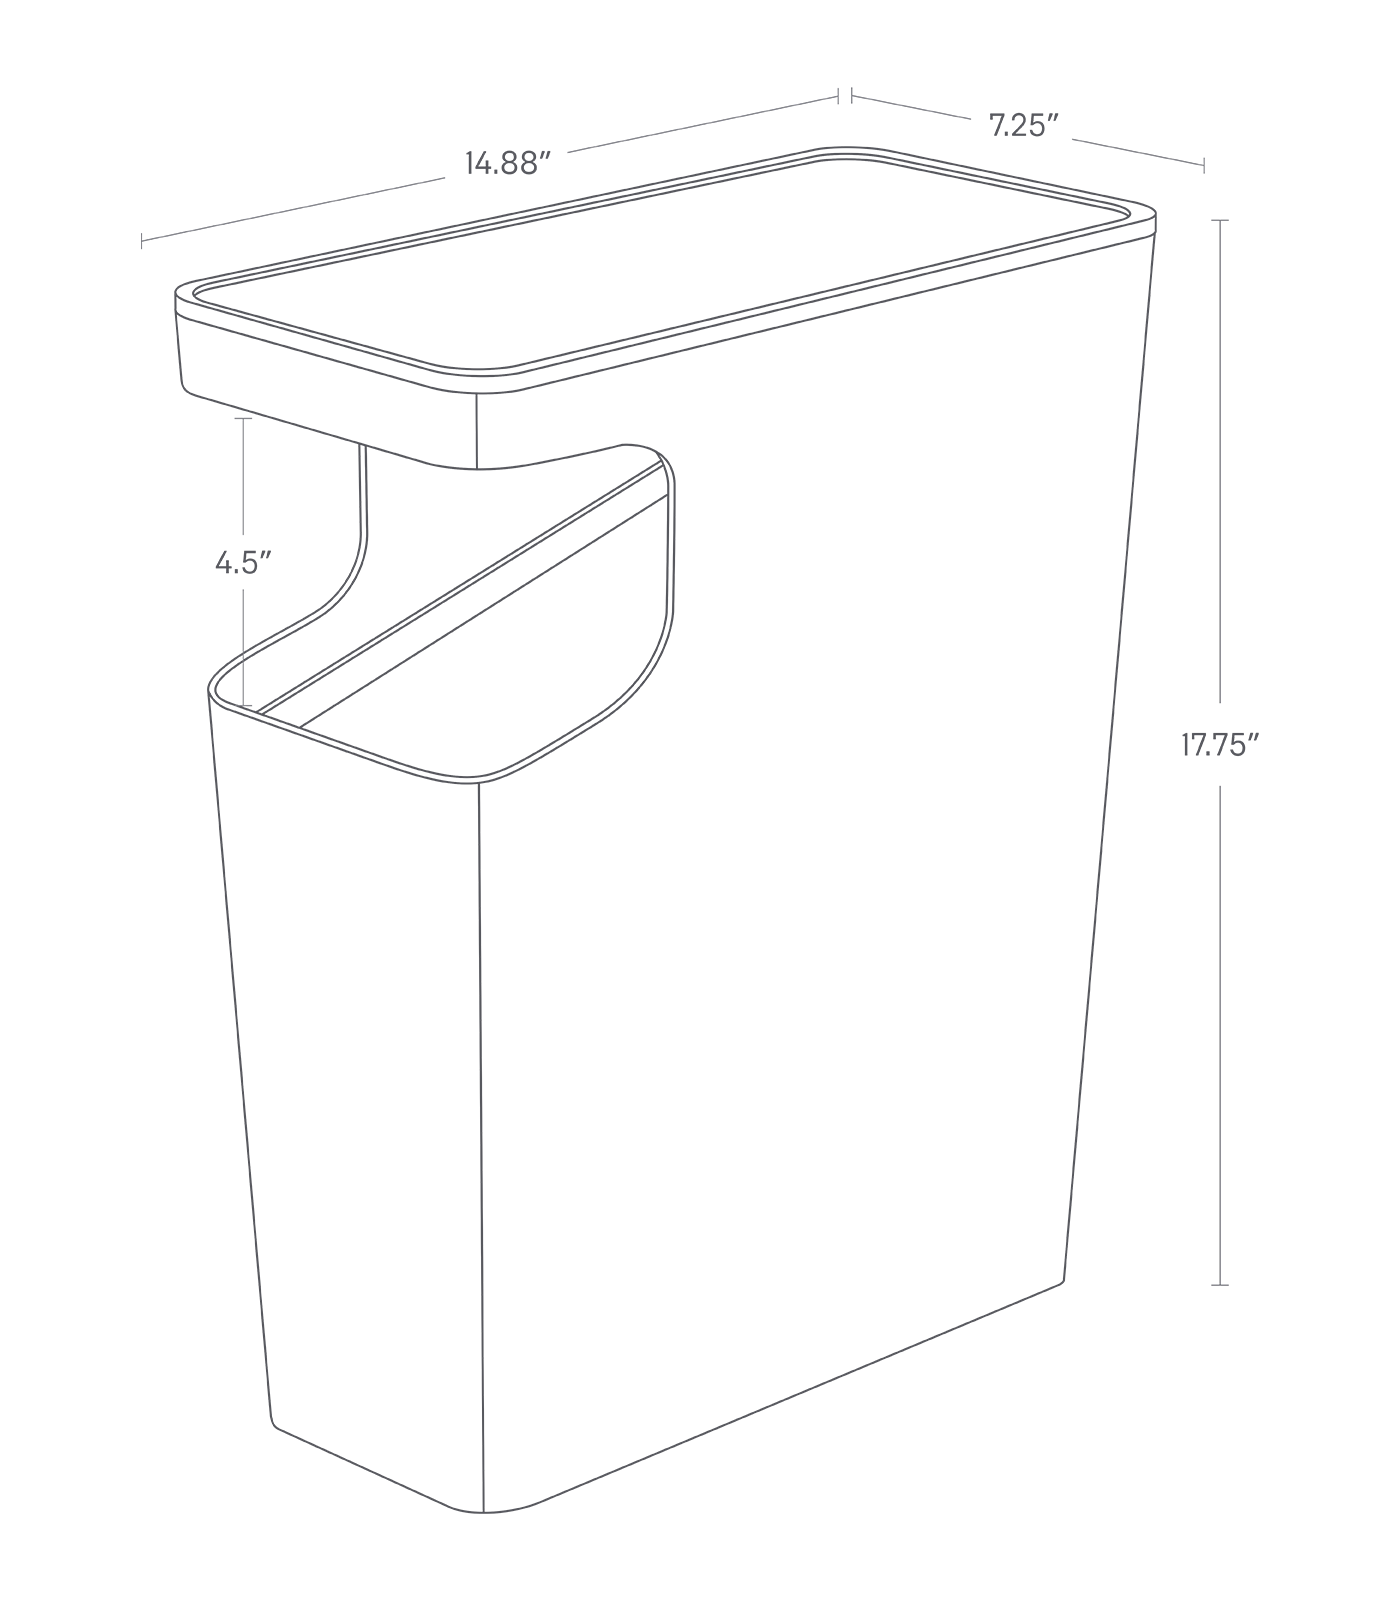 Dimension image for Side Table Trash Can showing length of 14.88